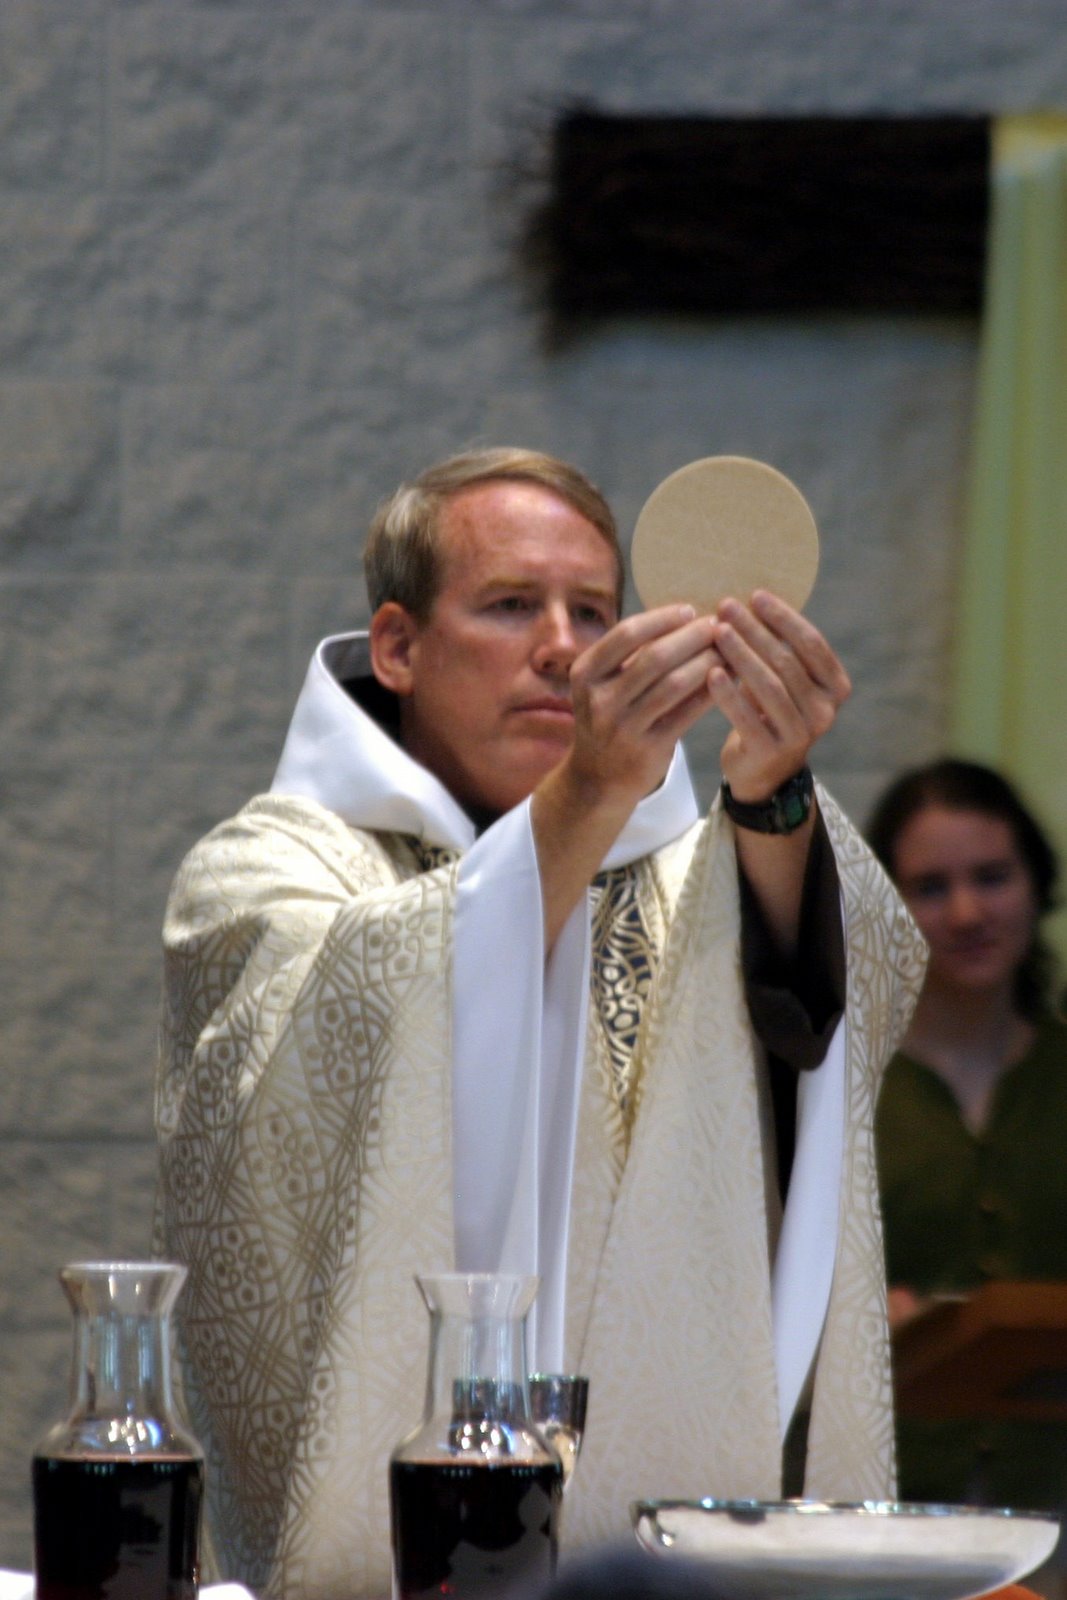 Francis of Assisi: The Eucharist | friarmusings